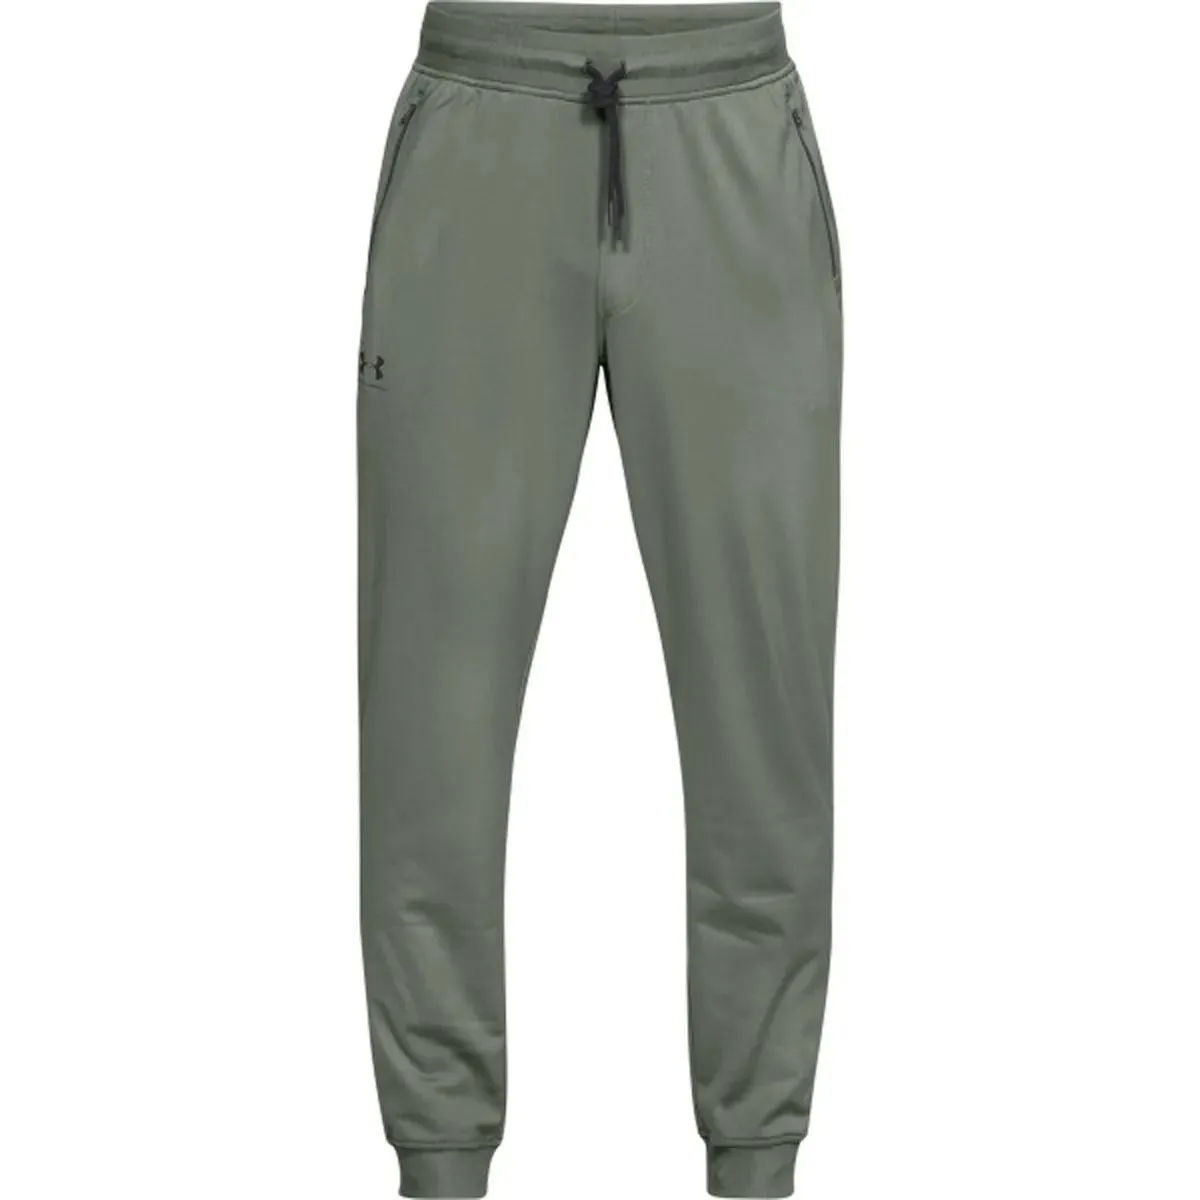 Under Armour Hlače SPORTSTYLE TRICOT JOGGER 